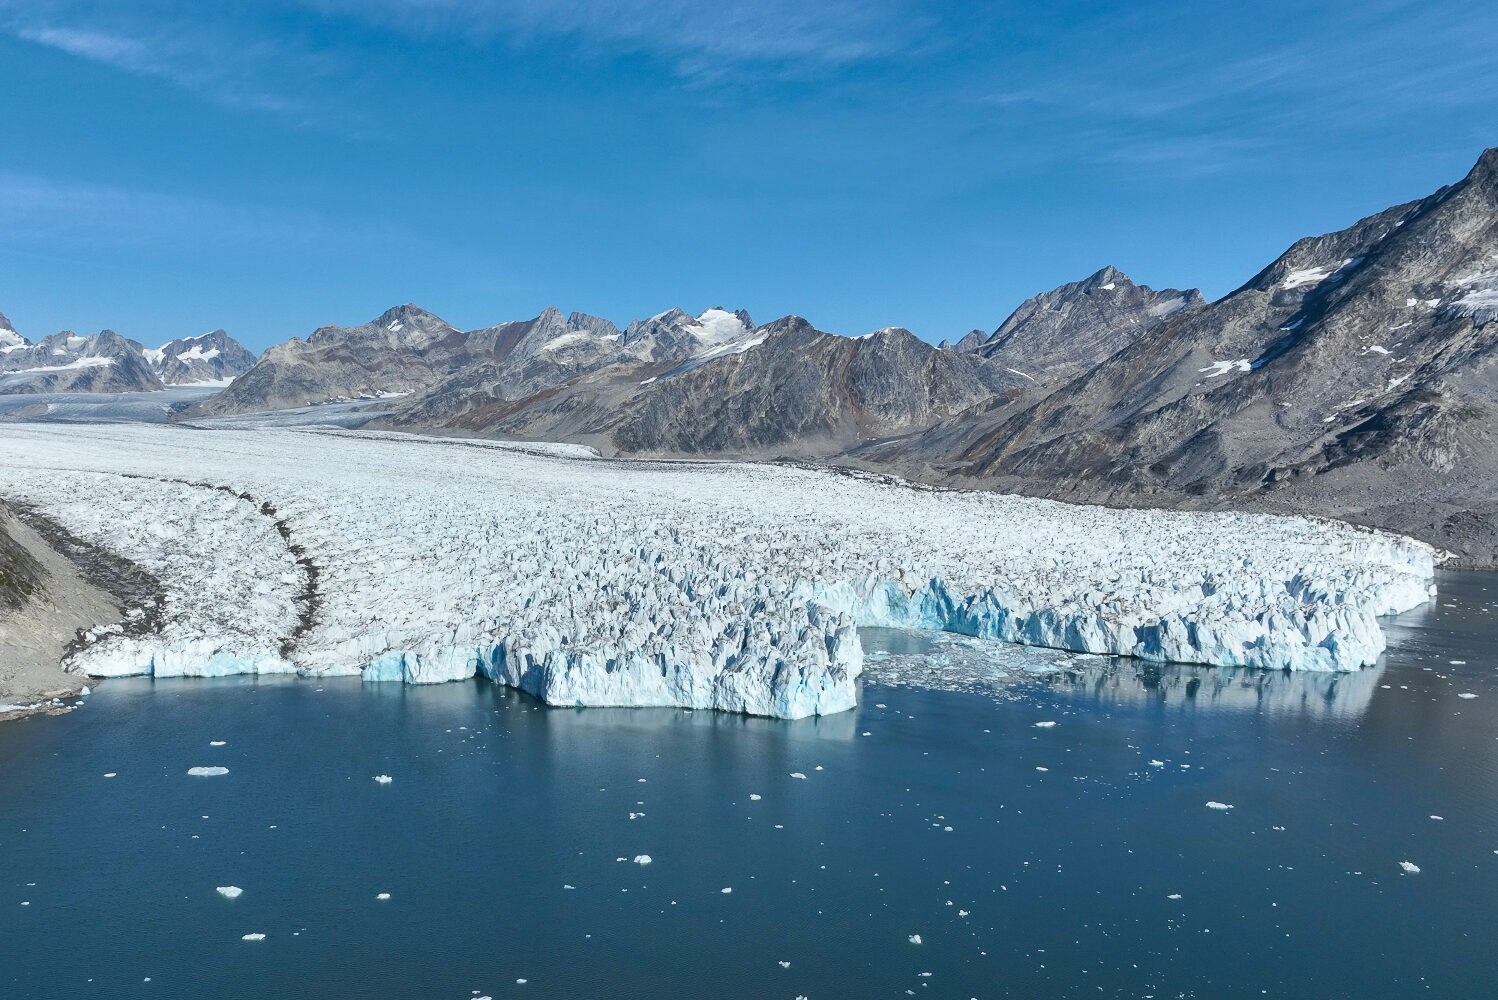 View of the front of Knud Rasmussen Glacier. Photo by Anna & Lucas Jahn - Visit East Greenland